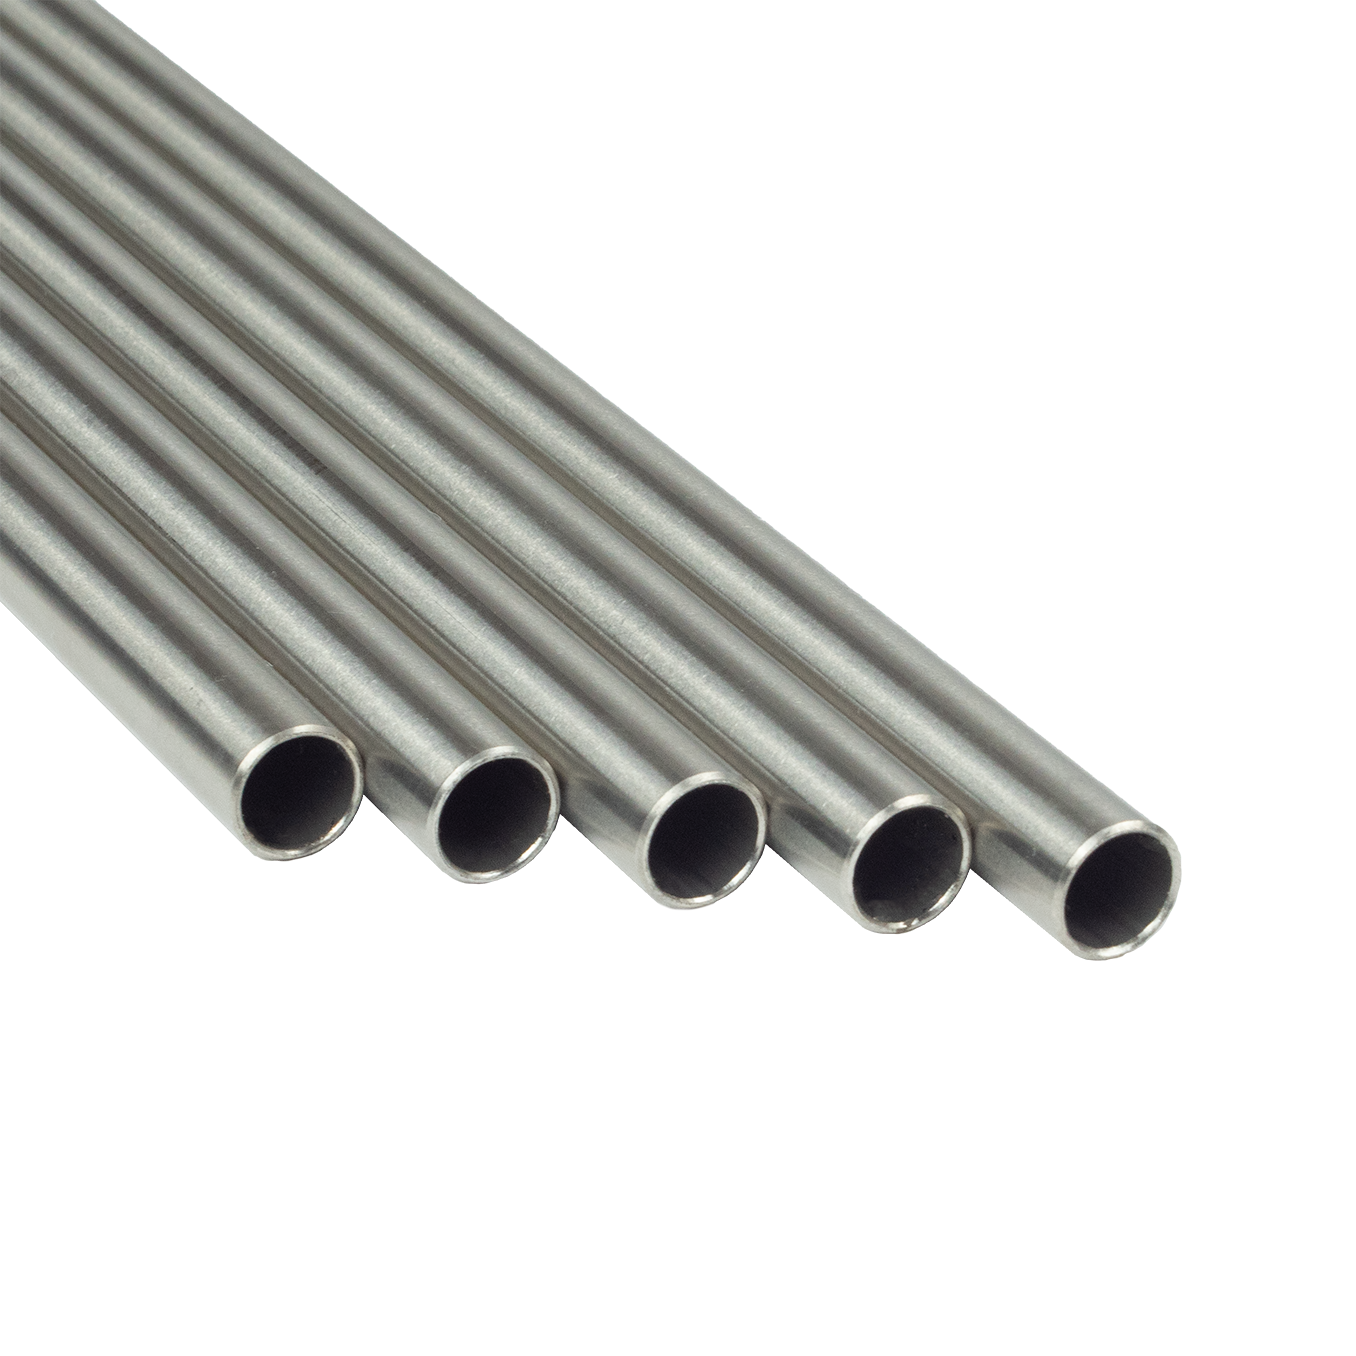 SFS Stand Tube - Ø 10 x 1 mm, length 300 mm - stainless steel